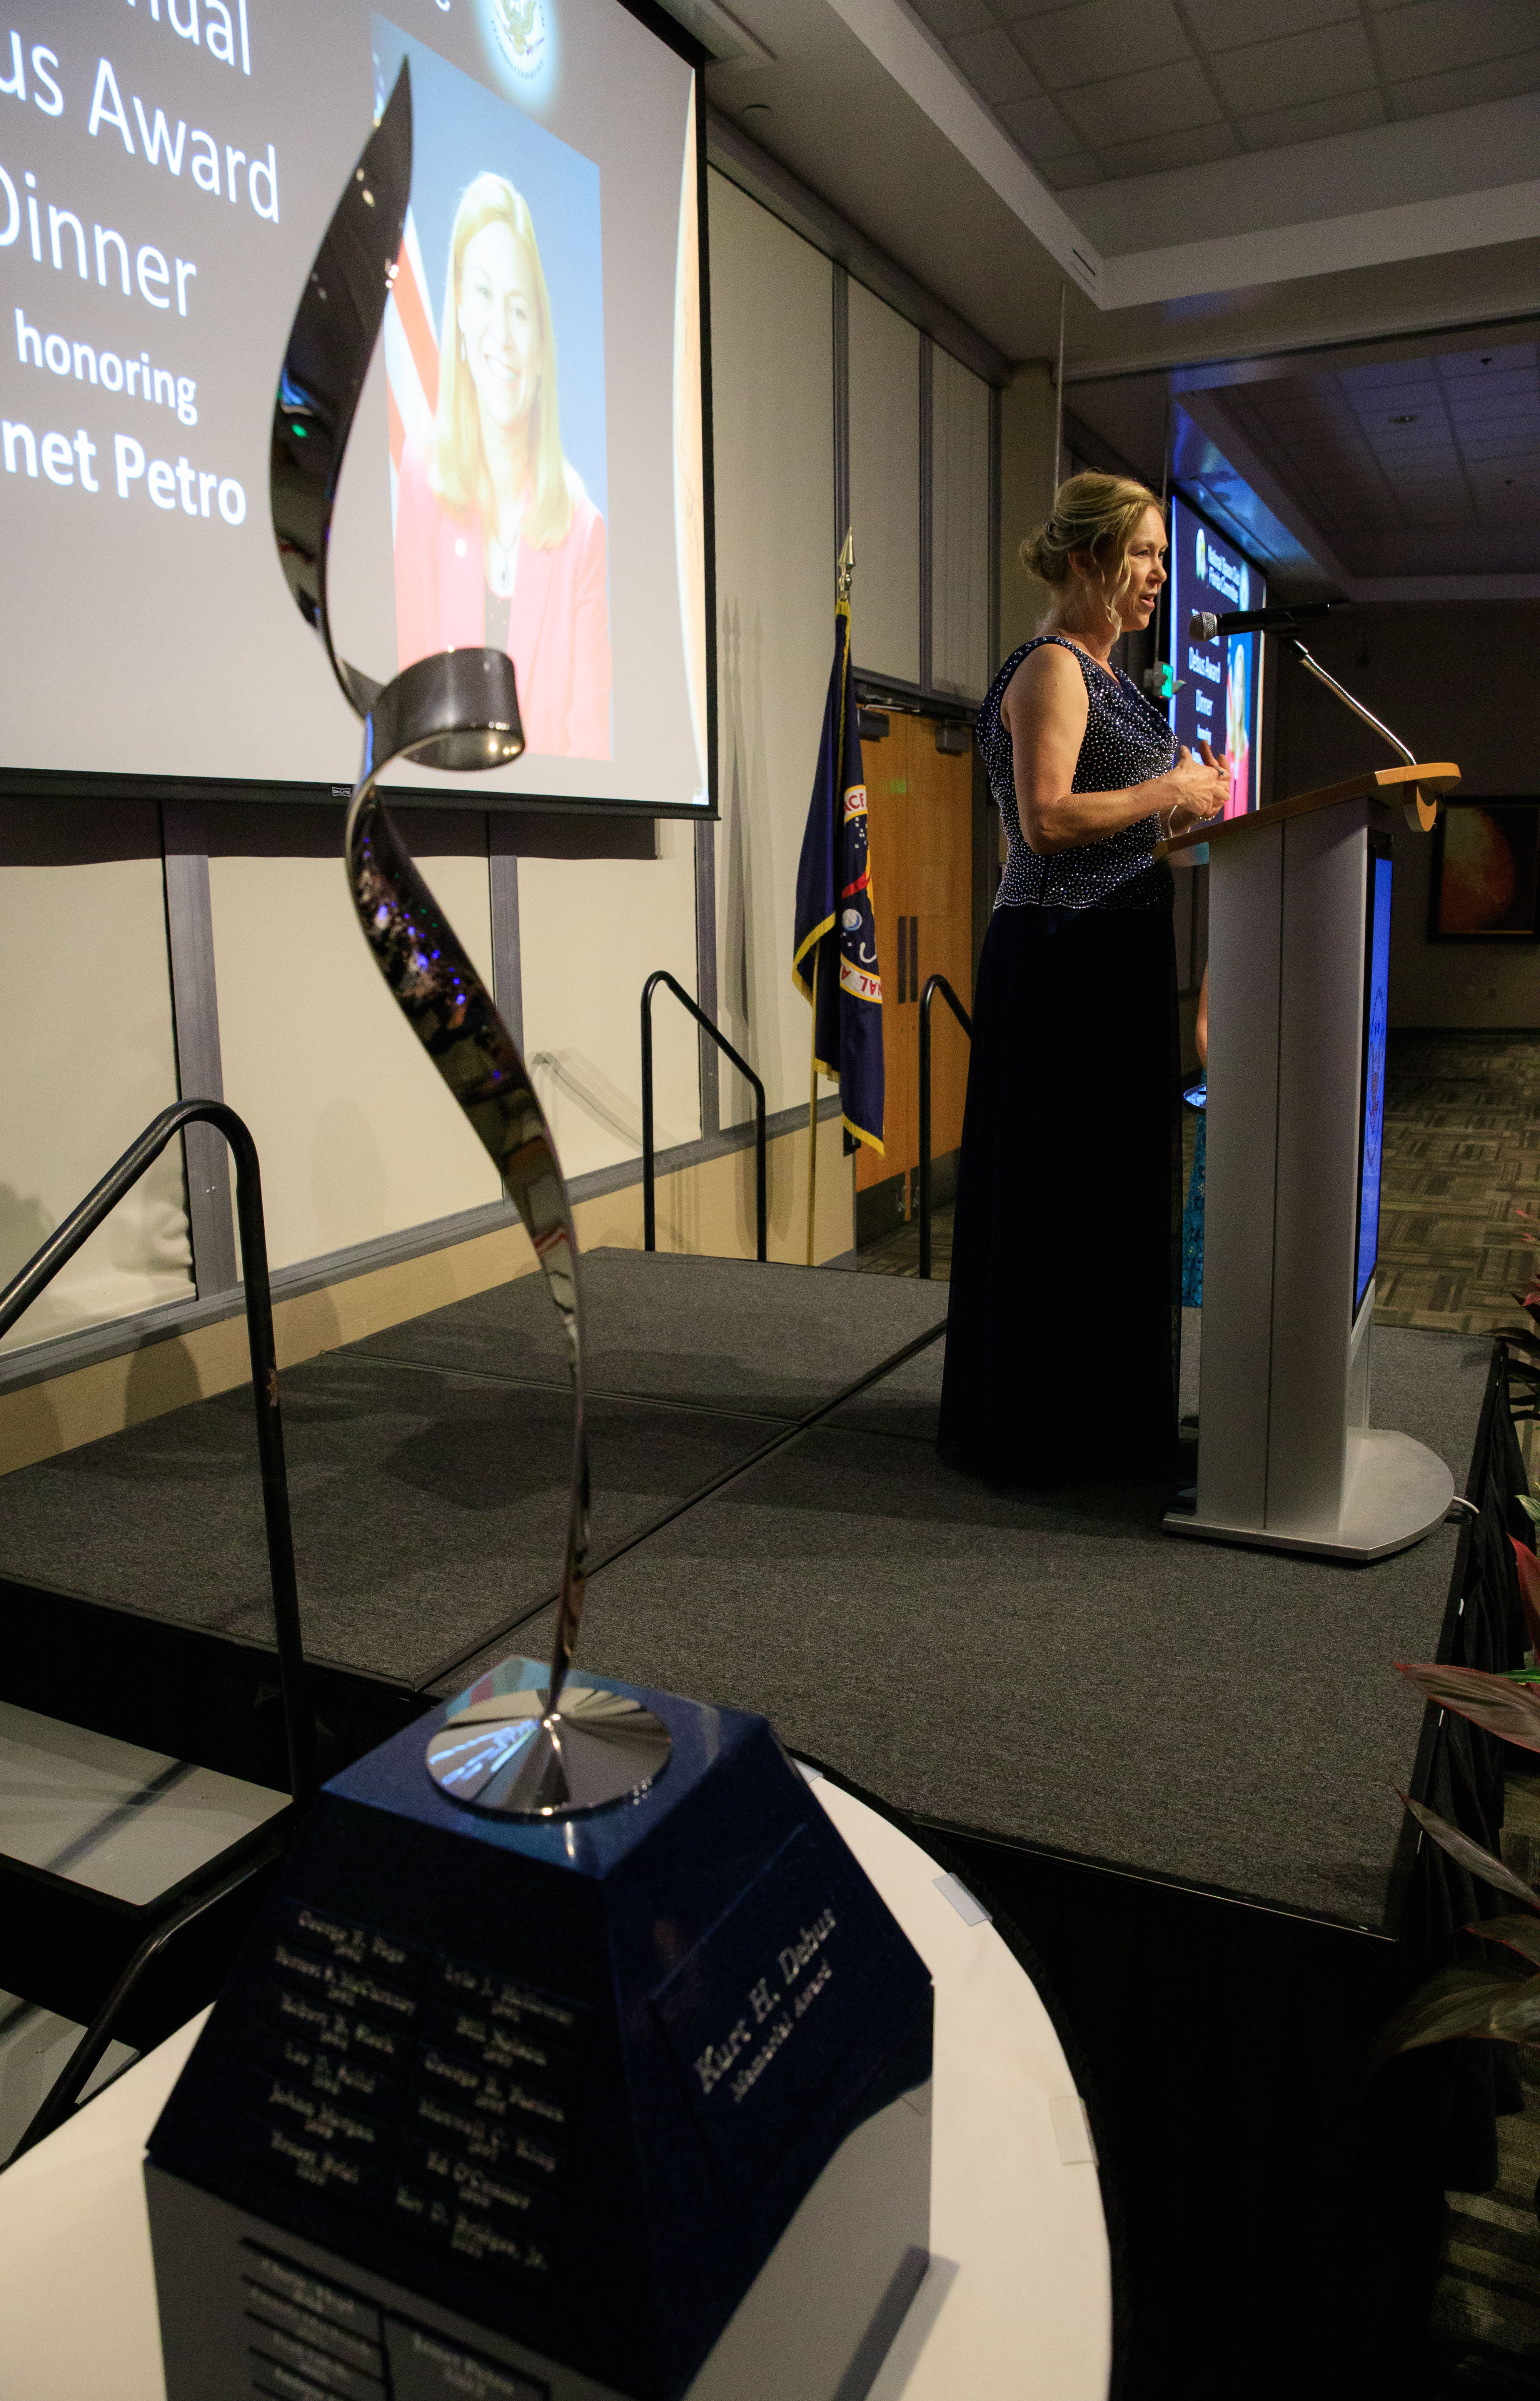 Kennedy Space Center Director Janet Petro addresses friends, family, and colleagues following her acceptance of the Dr. Kurt H. Debus Award during a ceremony held at the Florida spaceport's visitor complex on June 24, 2022.